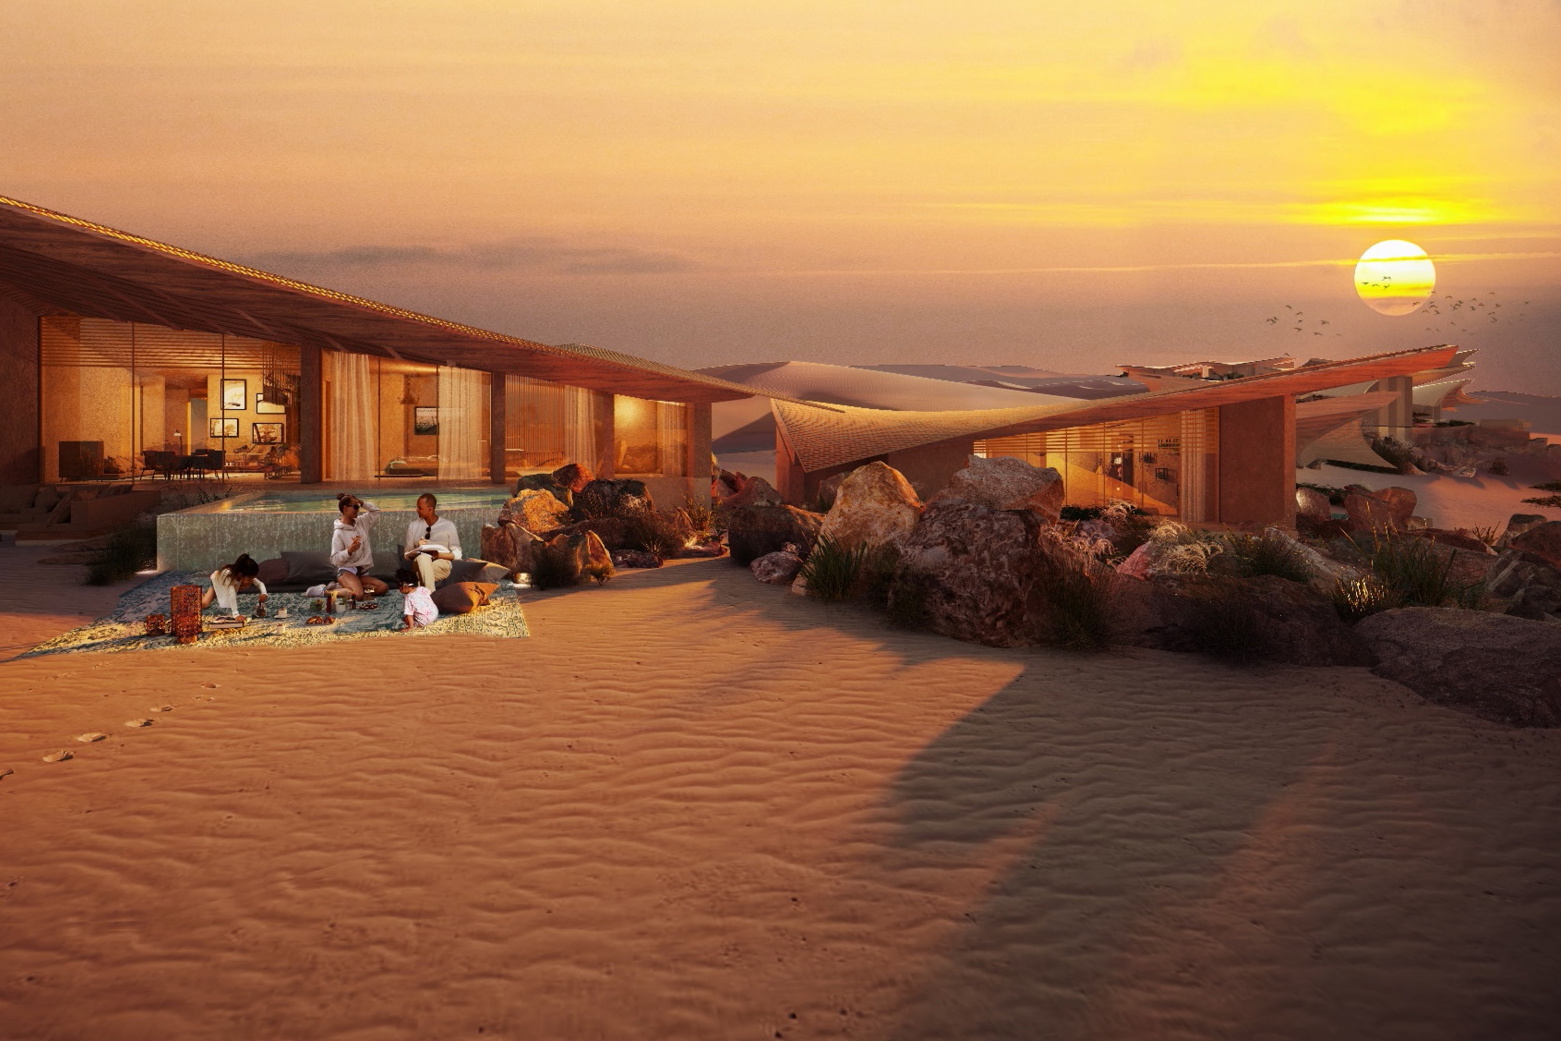 The Six Senses Southern Dunes, The Red Sea will be the group's first property in the Kingdom of Saudi Arabia Click to enlarge.